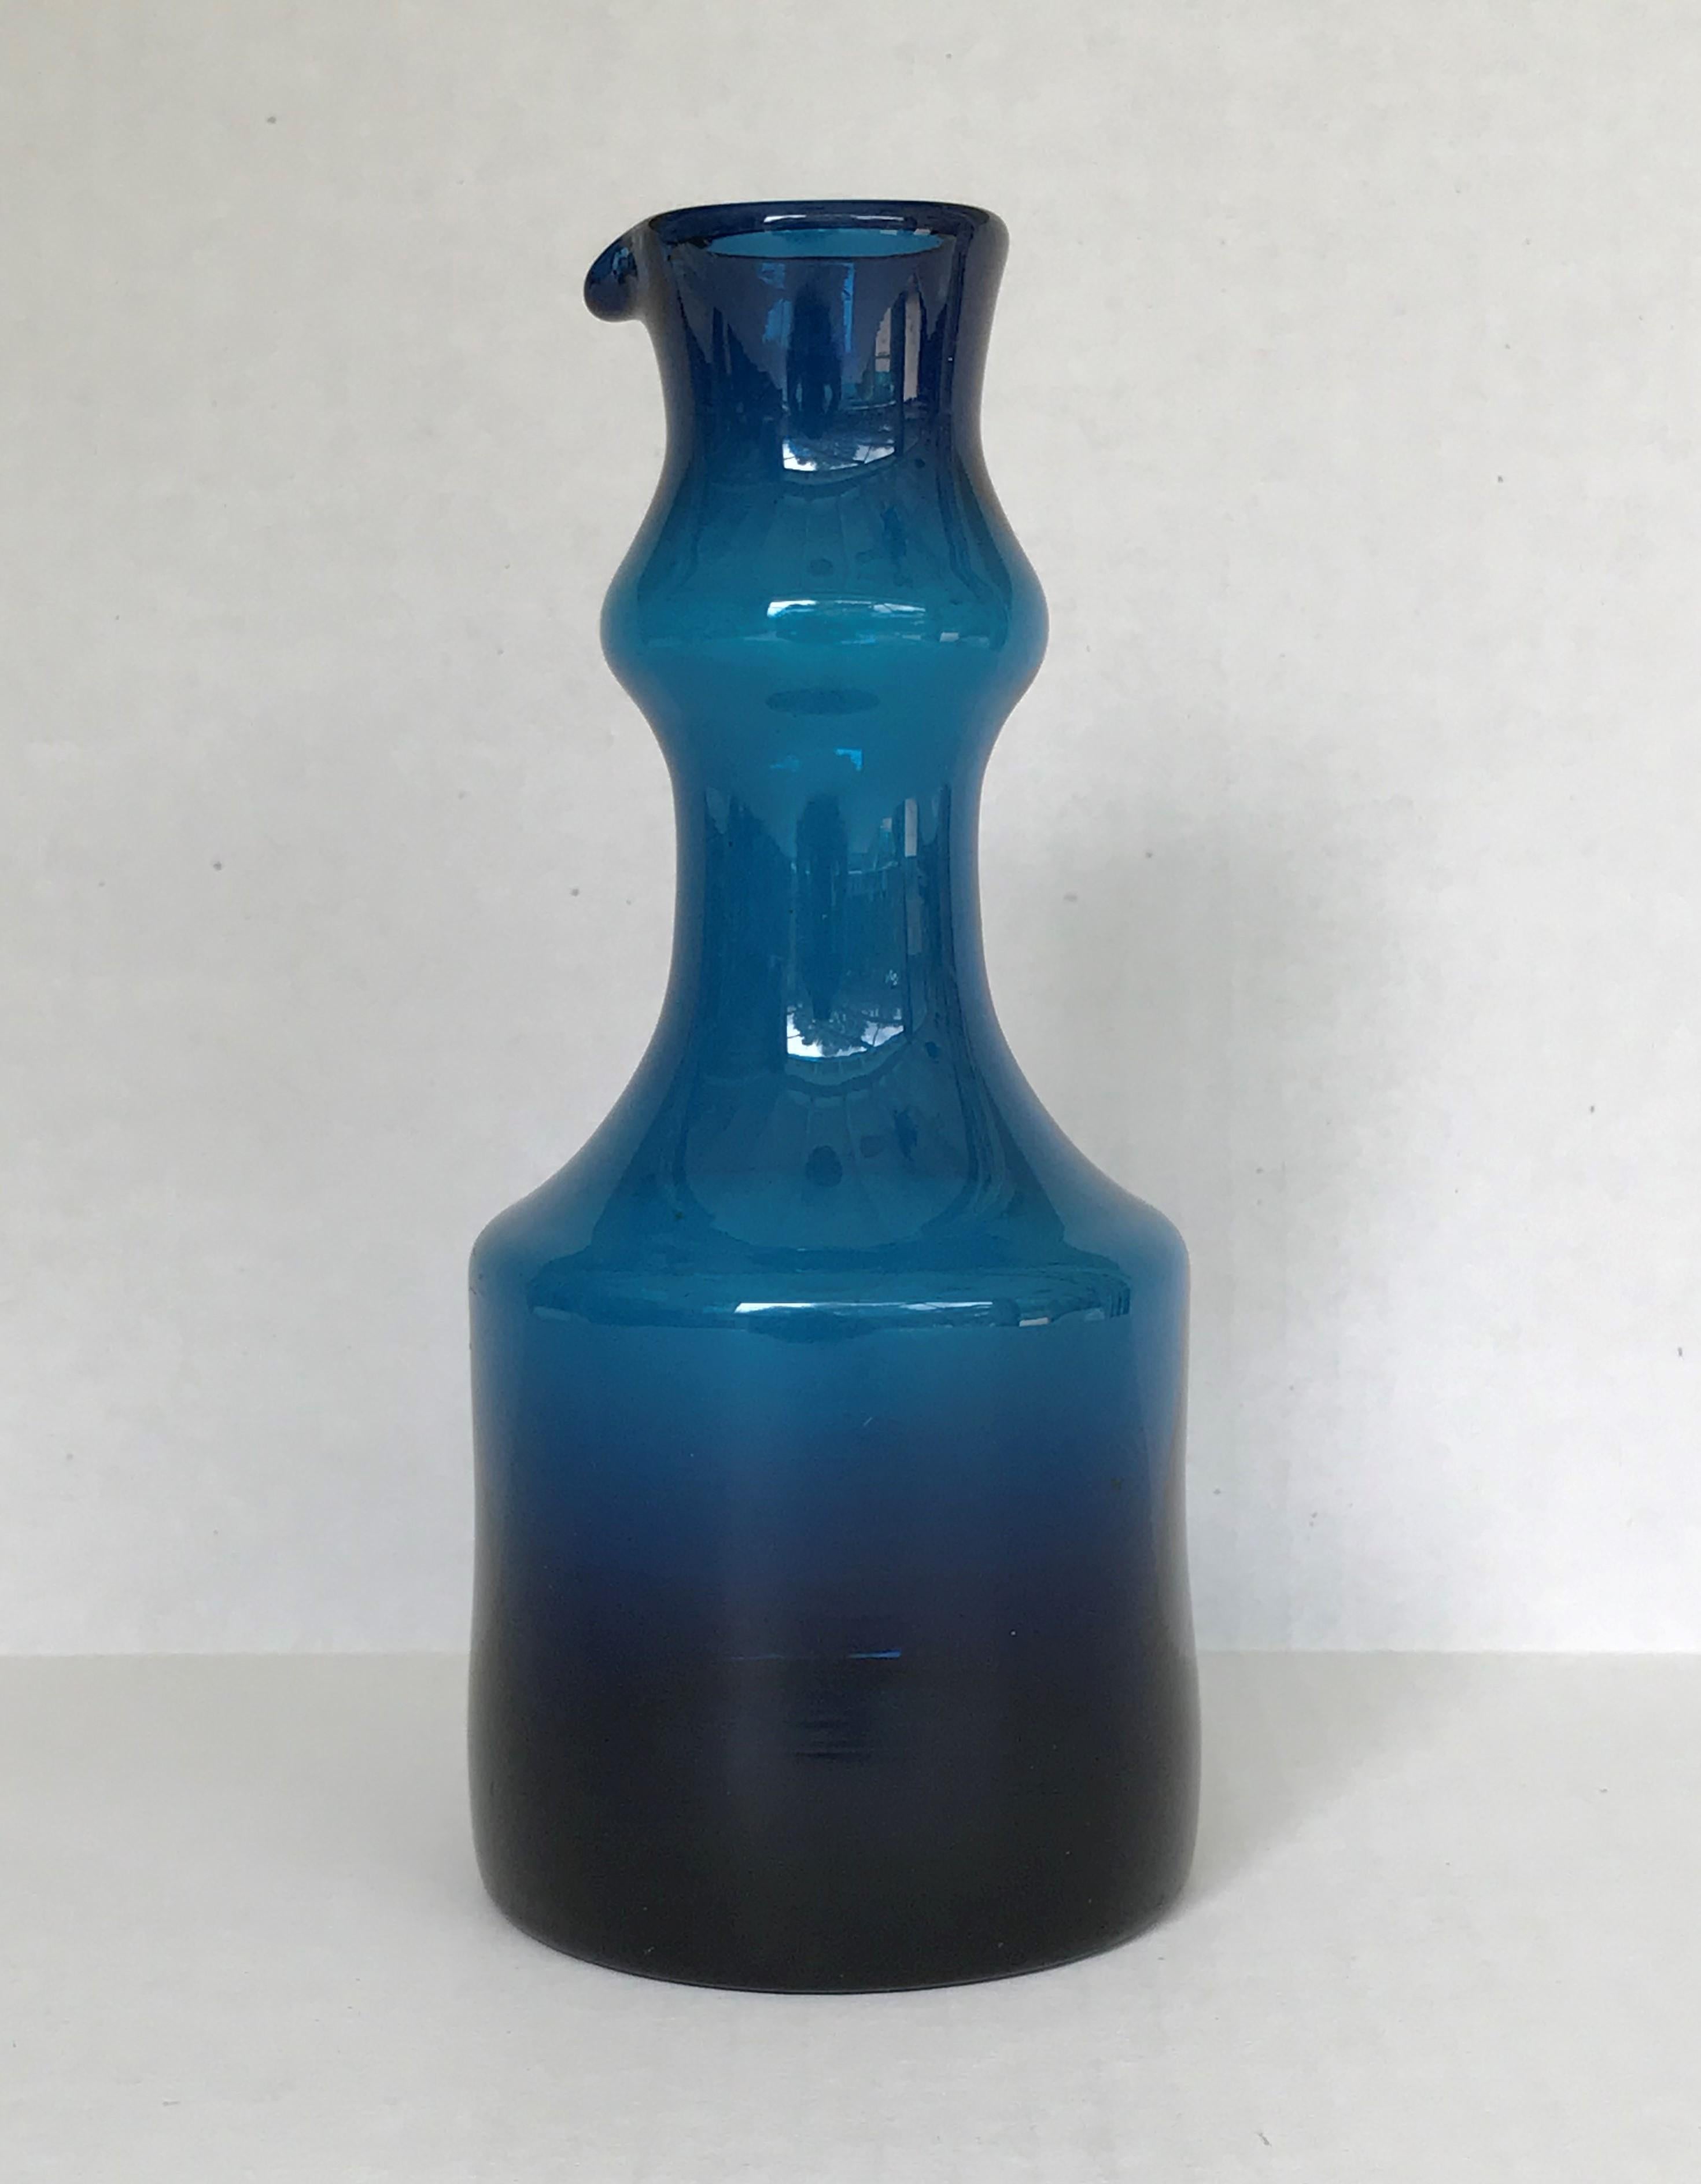 Beautiful Mid-Century Modern deep blue vessel with spout by Swedish glass maker Bertil Vallien (b. 1938) from the 1960s.
Vallien studied ceramics at Konstfack Art School in Stockholm in 1955 and became an accomplish ceramist. In 1959, Stig Lindberg